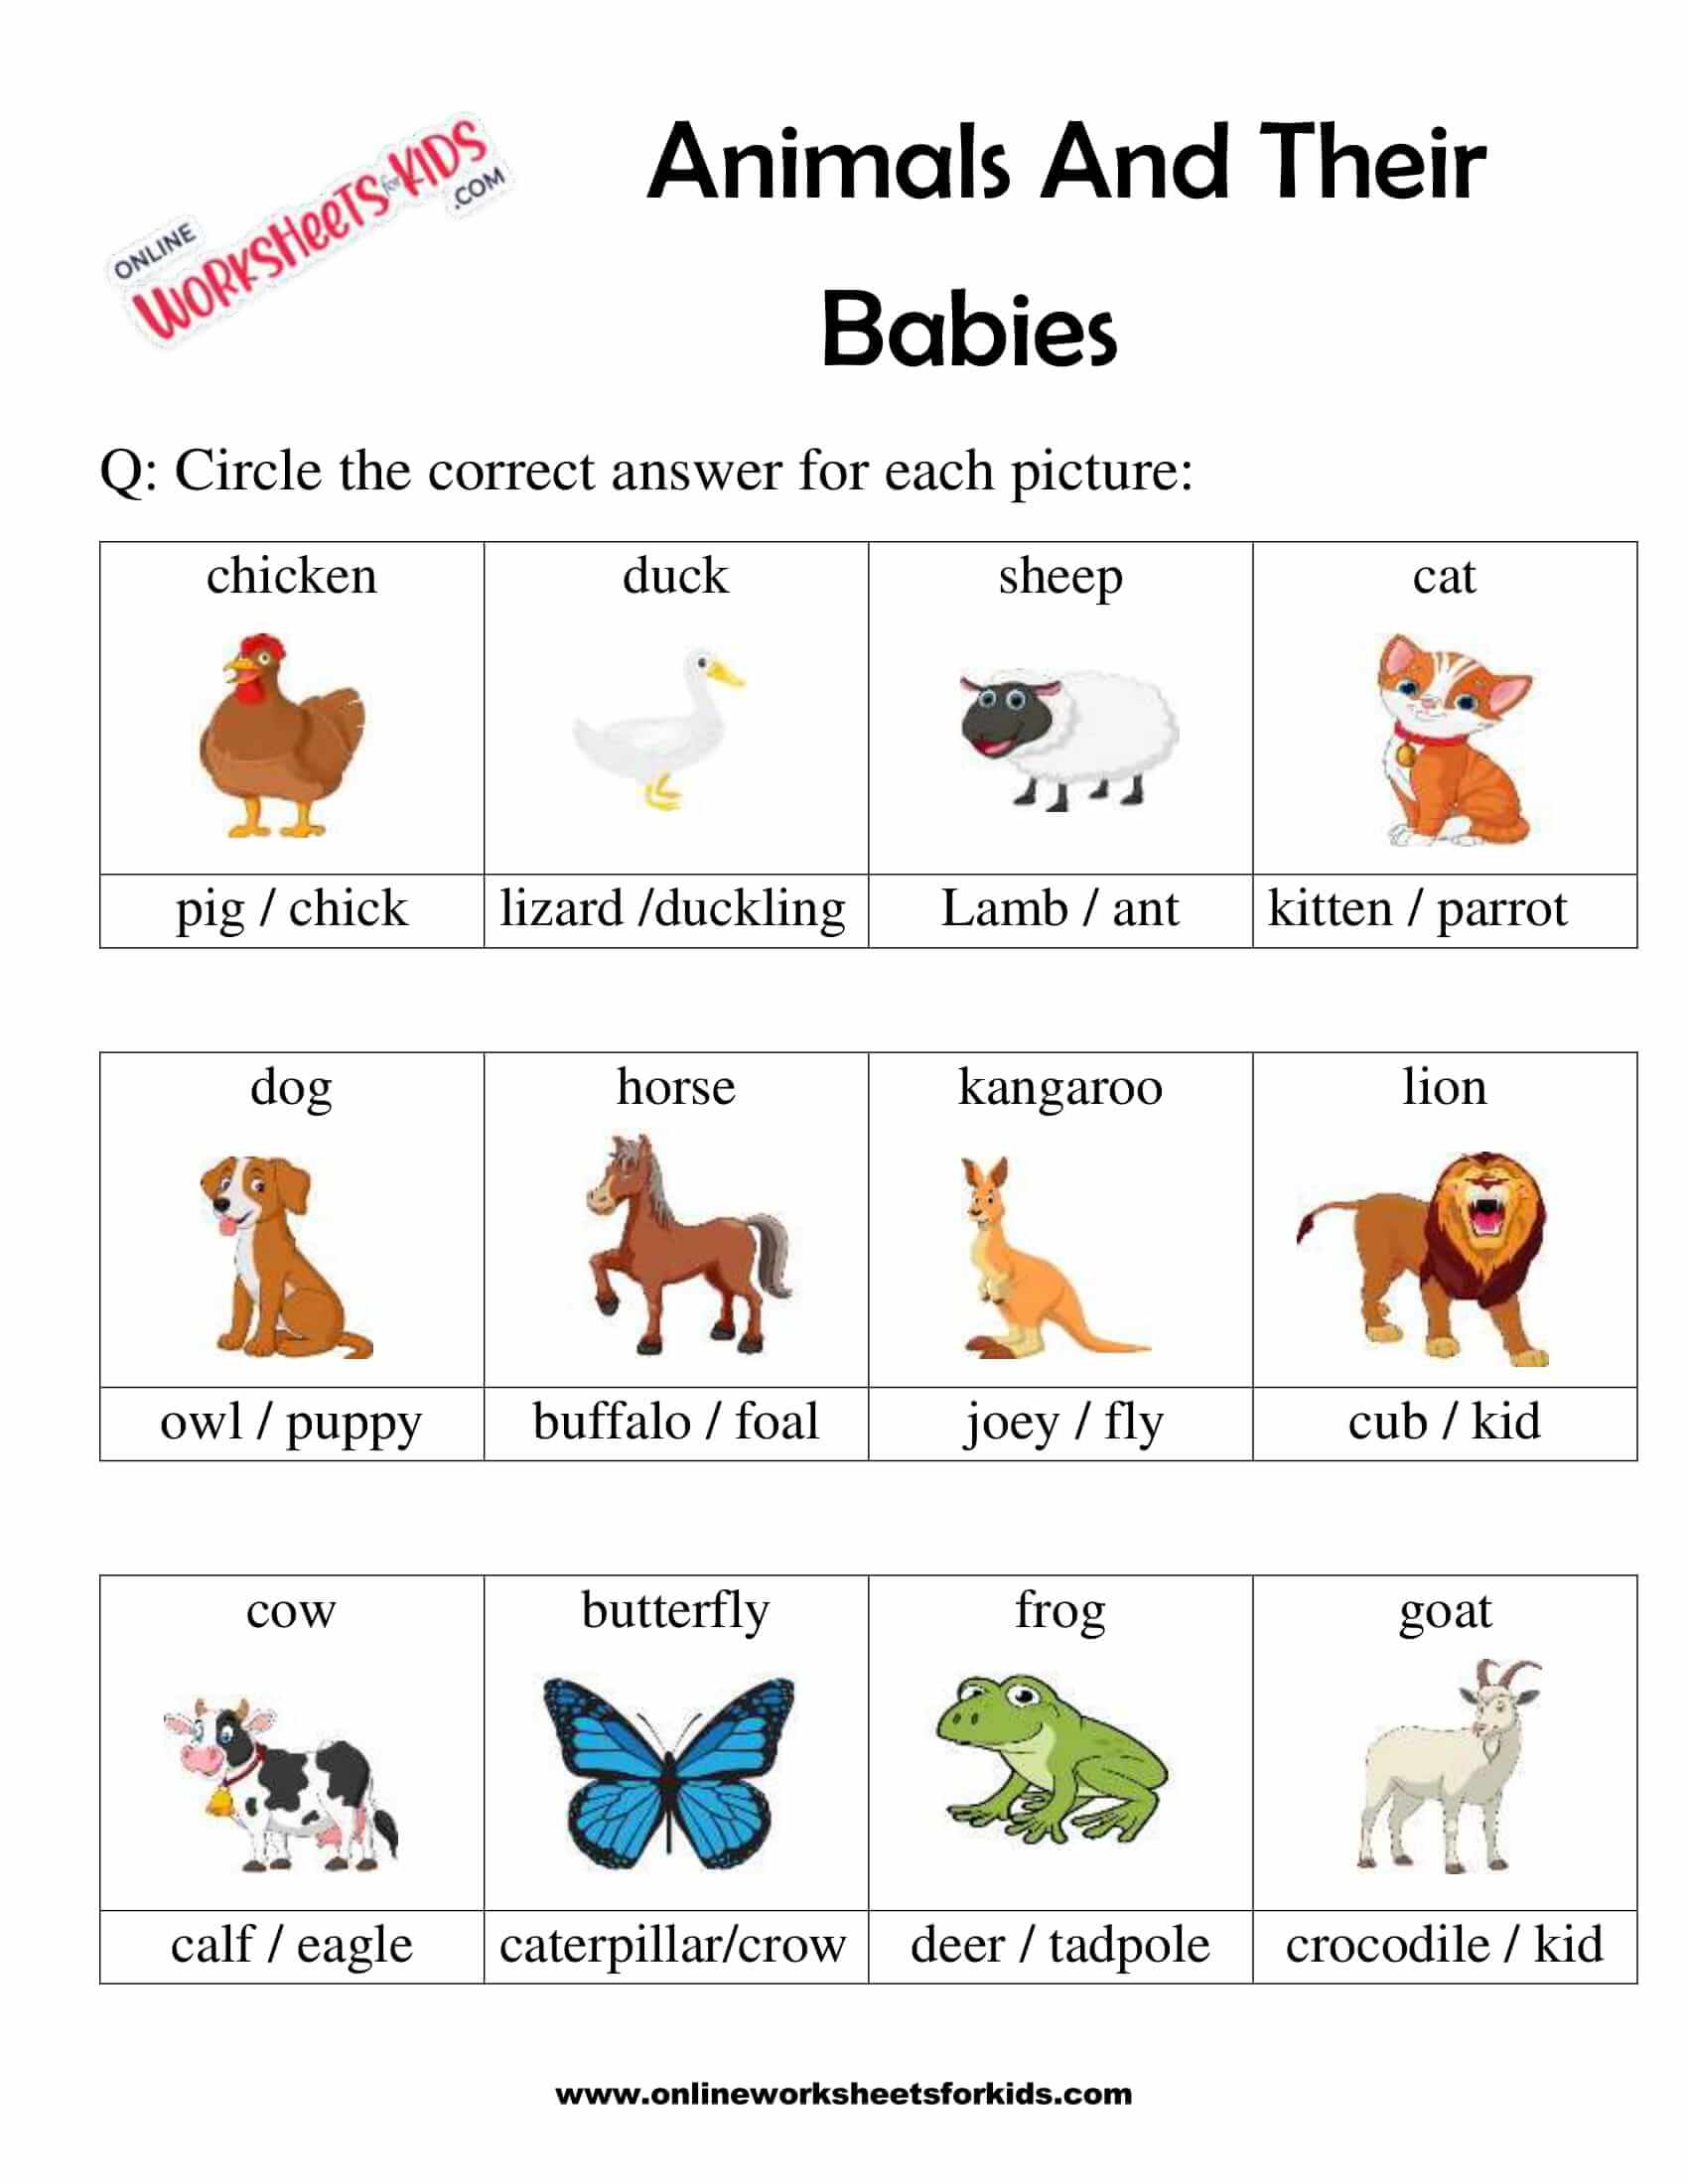 Animal And Their Babies Worksheet for Grade 1-4